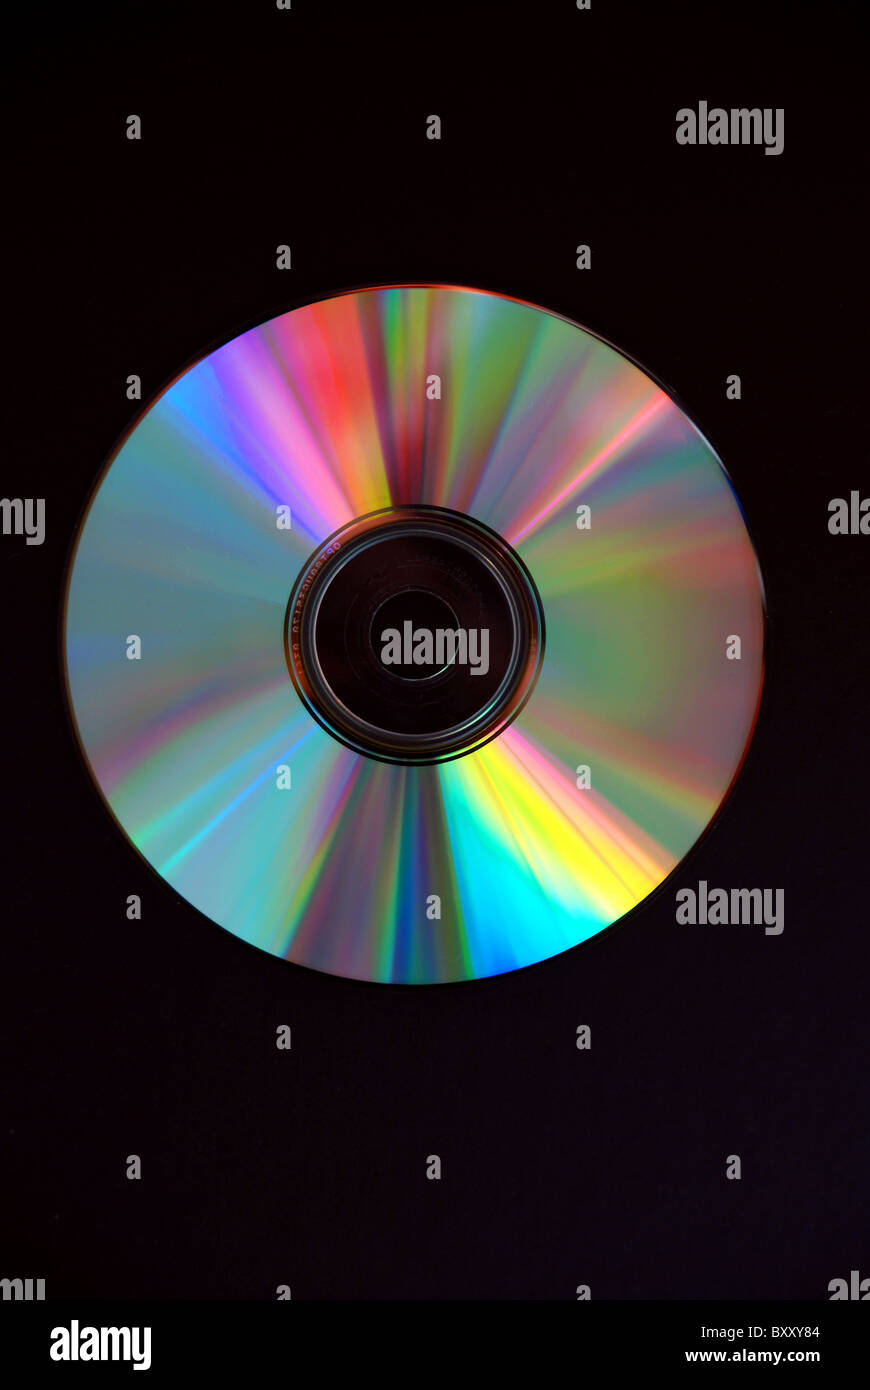 A spectral compact disc Stock Photo